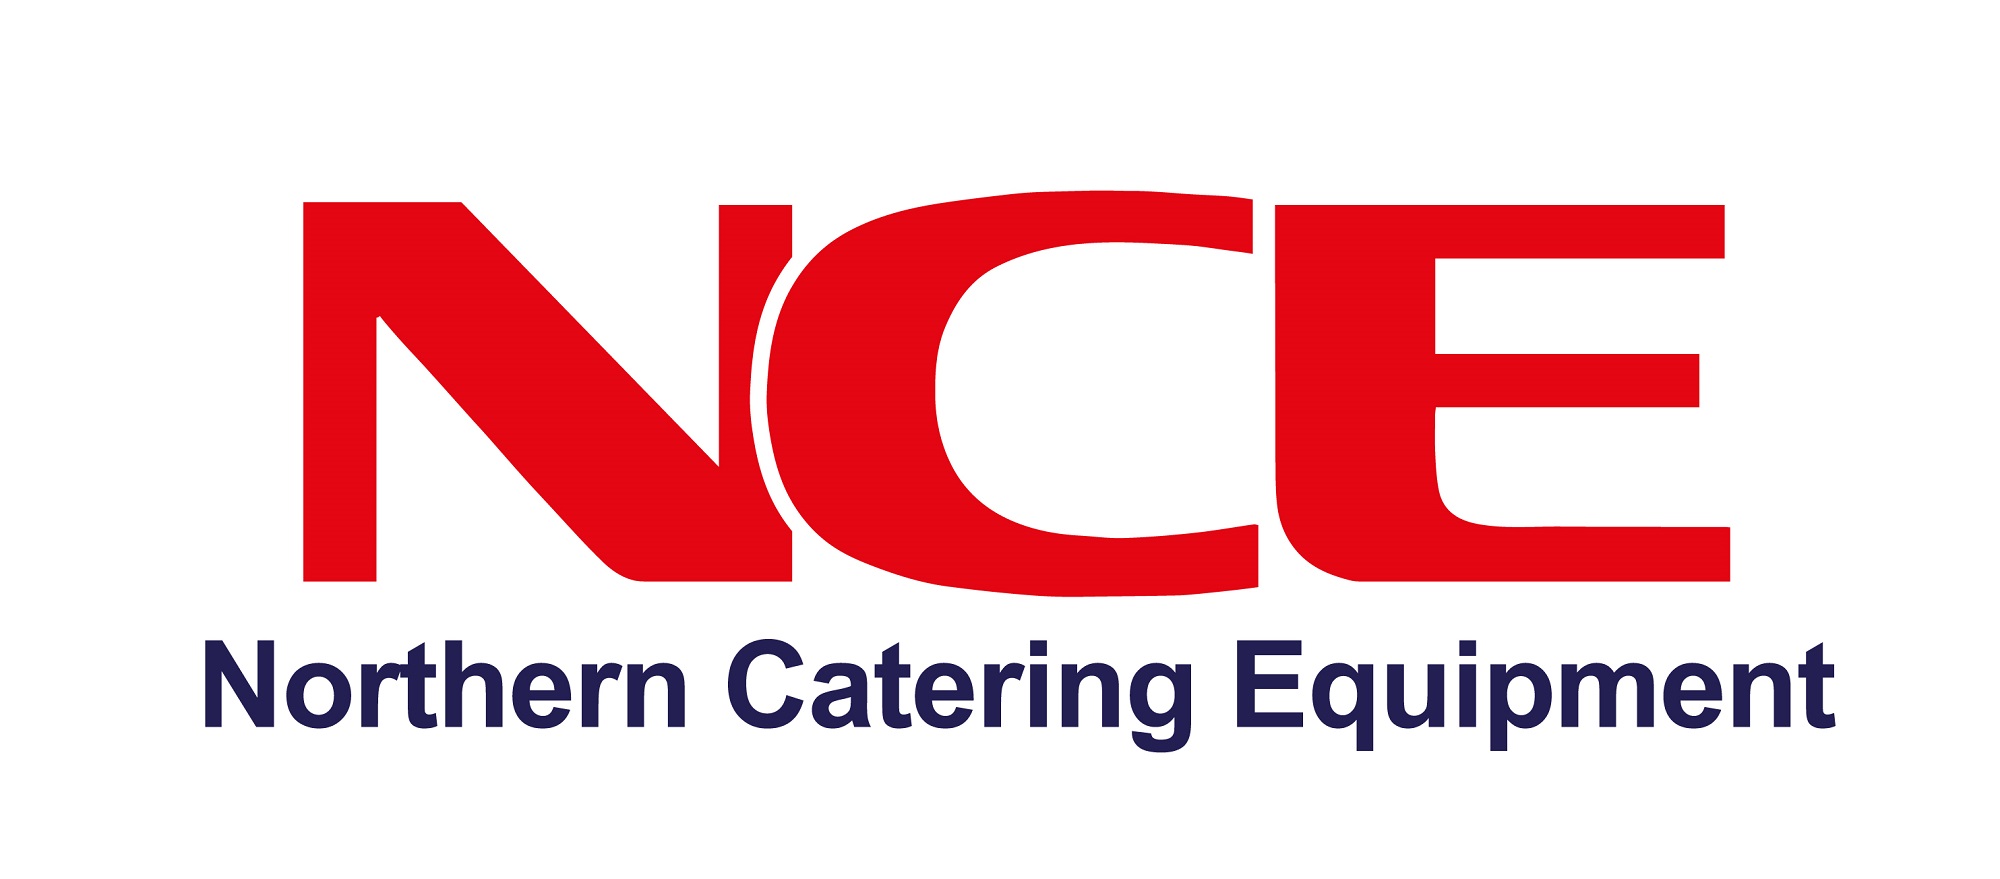 Northern Catering Equipment Ltd  image.